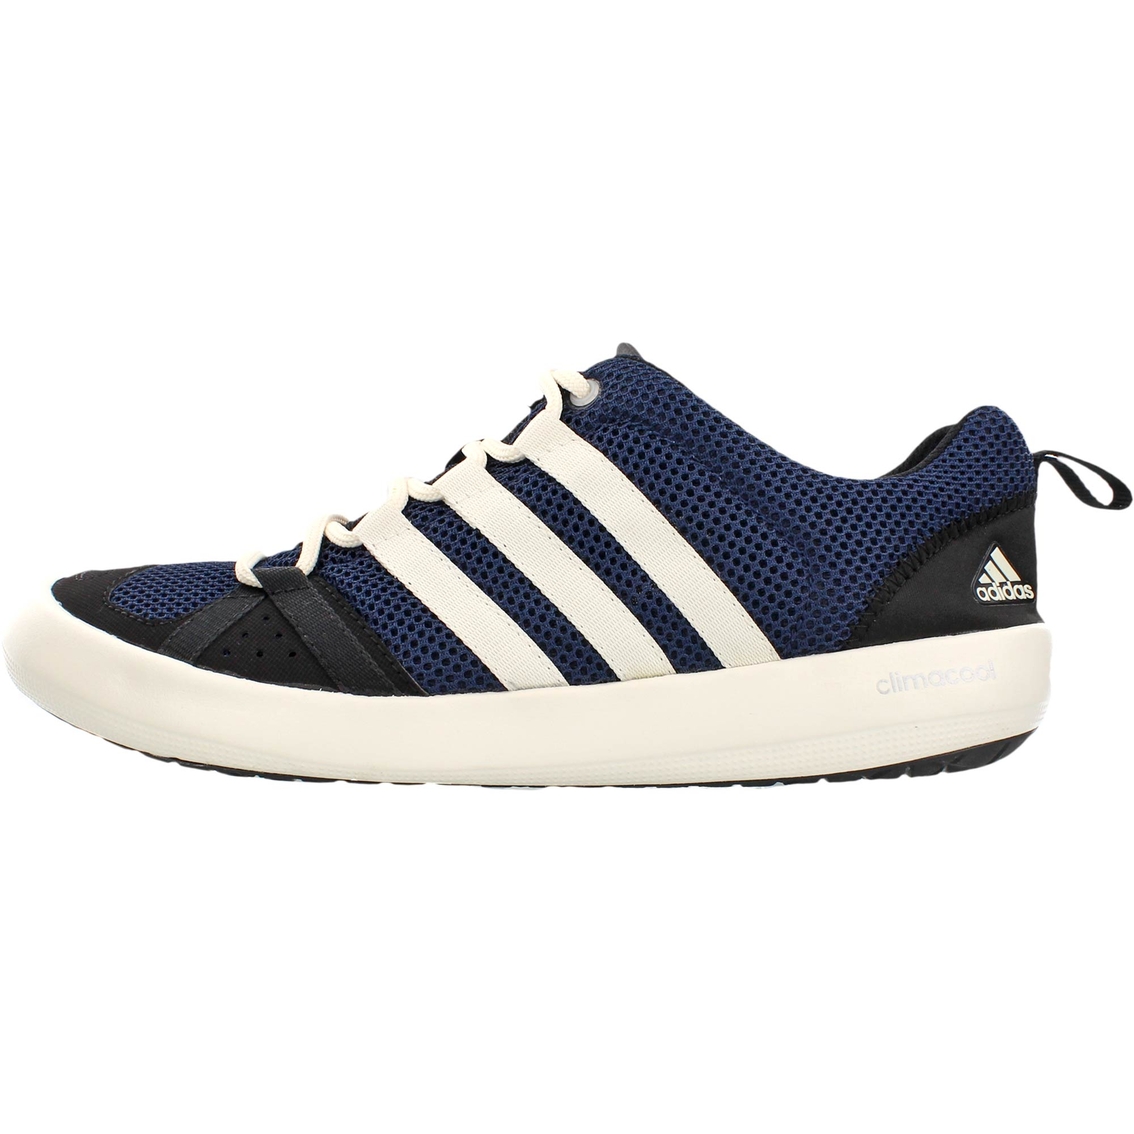 Adidas Outdoor Men's Climacool Boat Lace Outdoor Shoes - Image 2 of 4